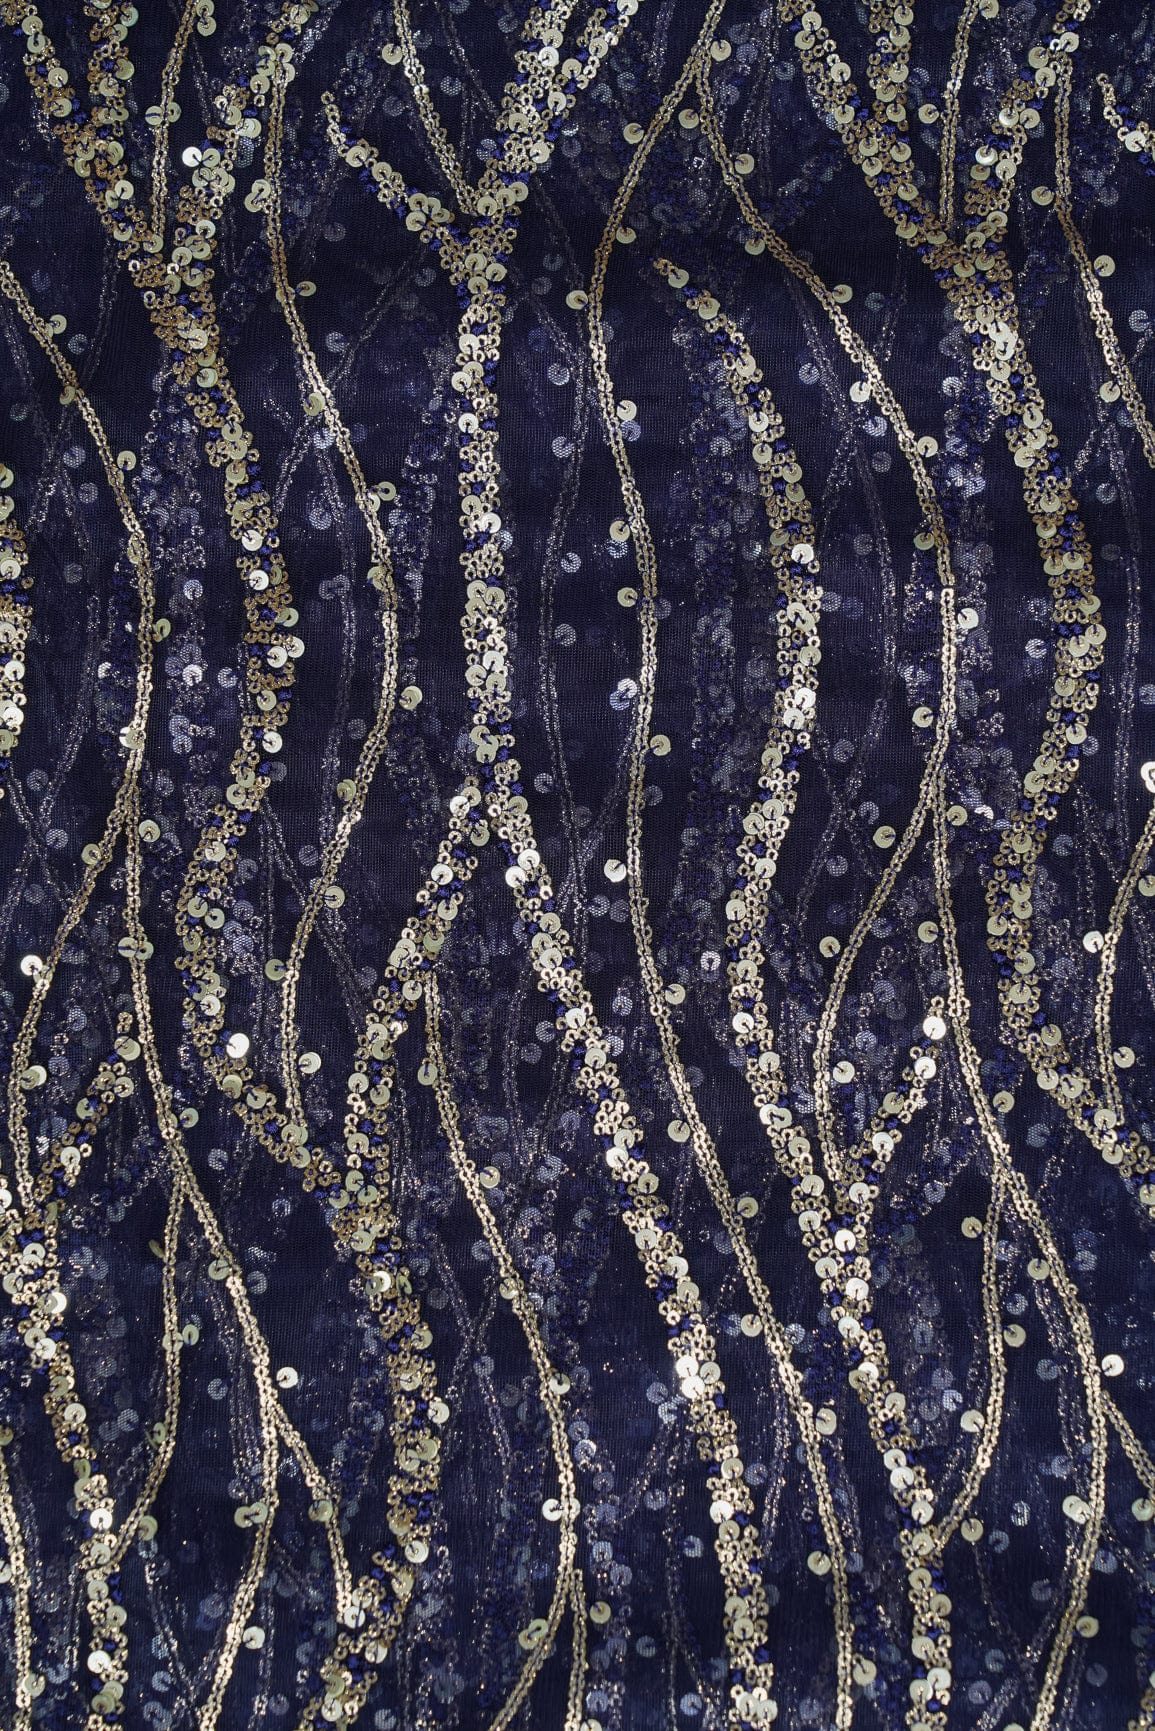 Gold Sequins With Navy Blue Thread Embroidery On Navy Blue Soft Net - doeraa